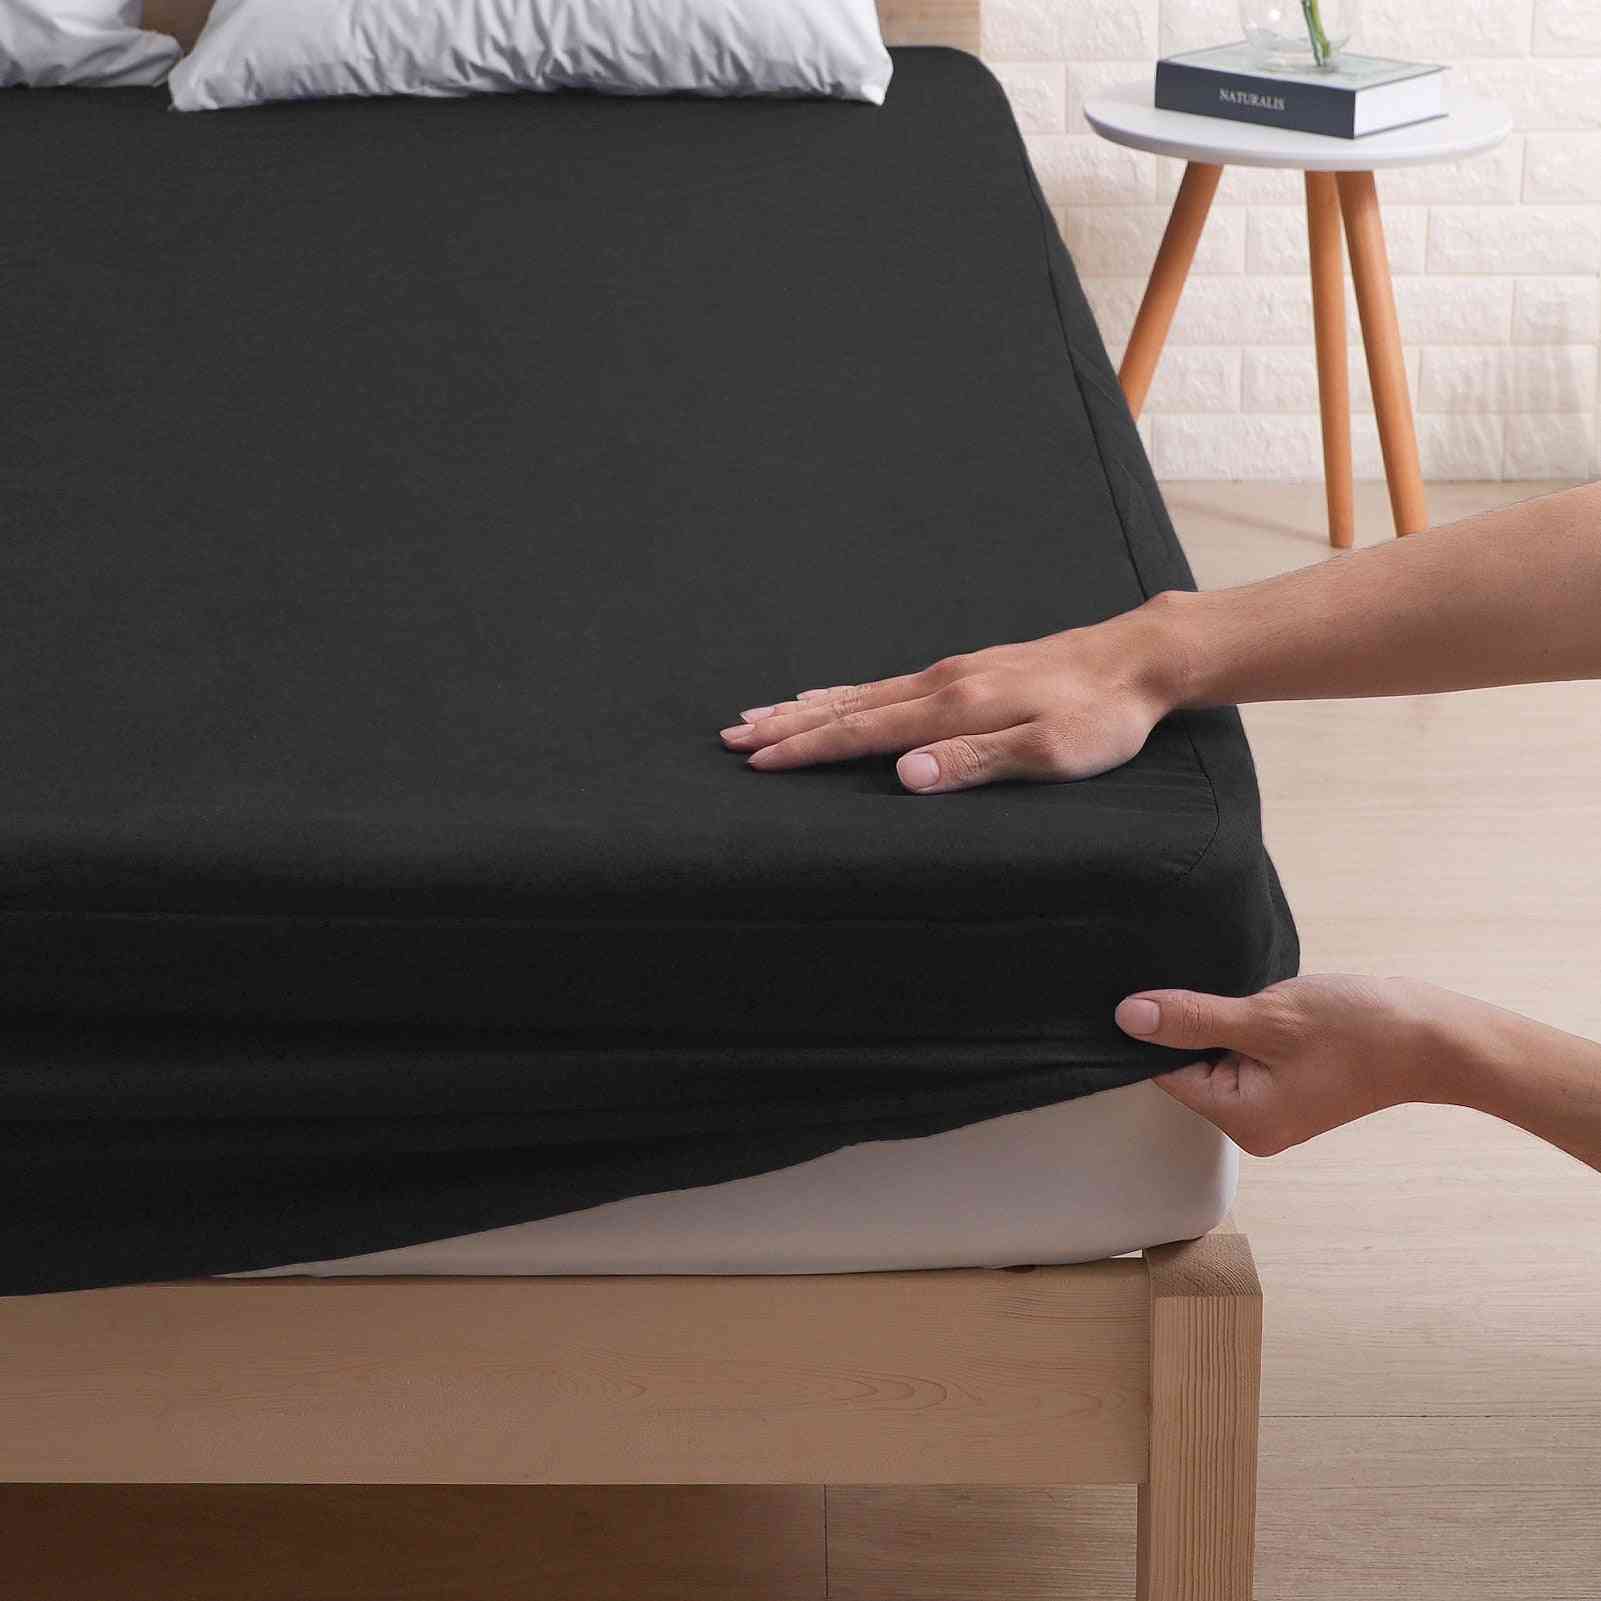 Waterproof Mattress, Colorful Bed Cover